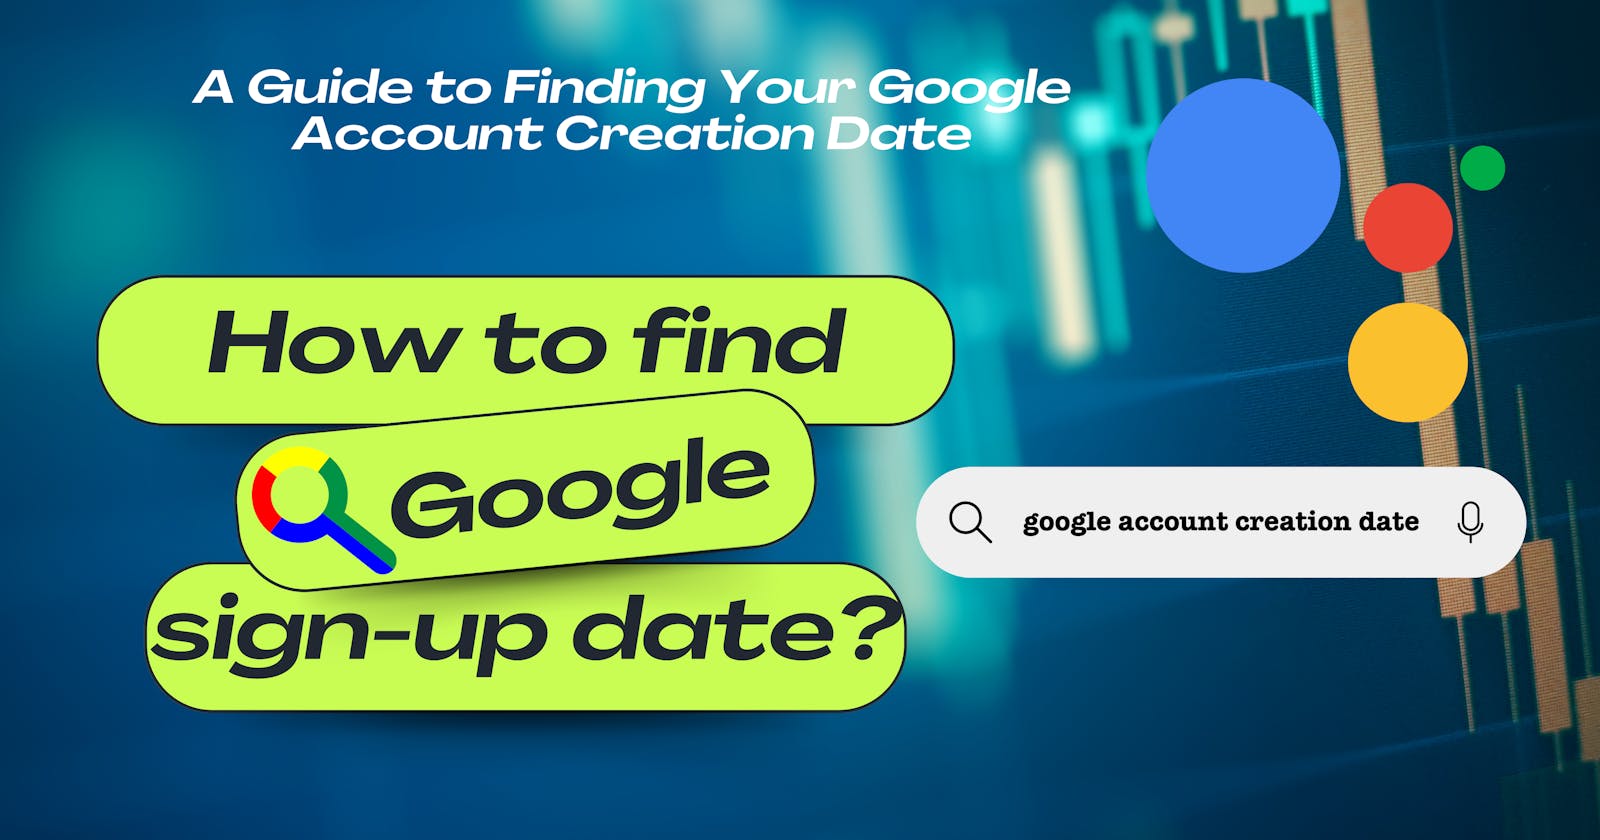 How to find Google account creation date?